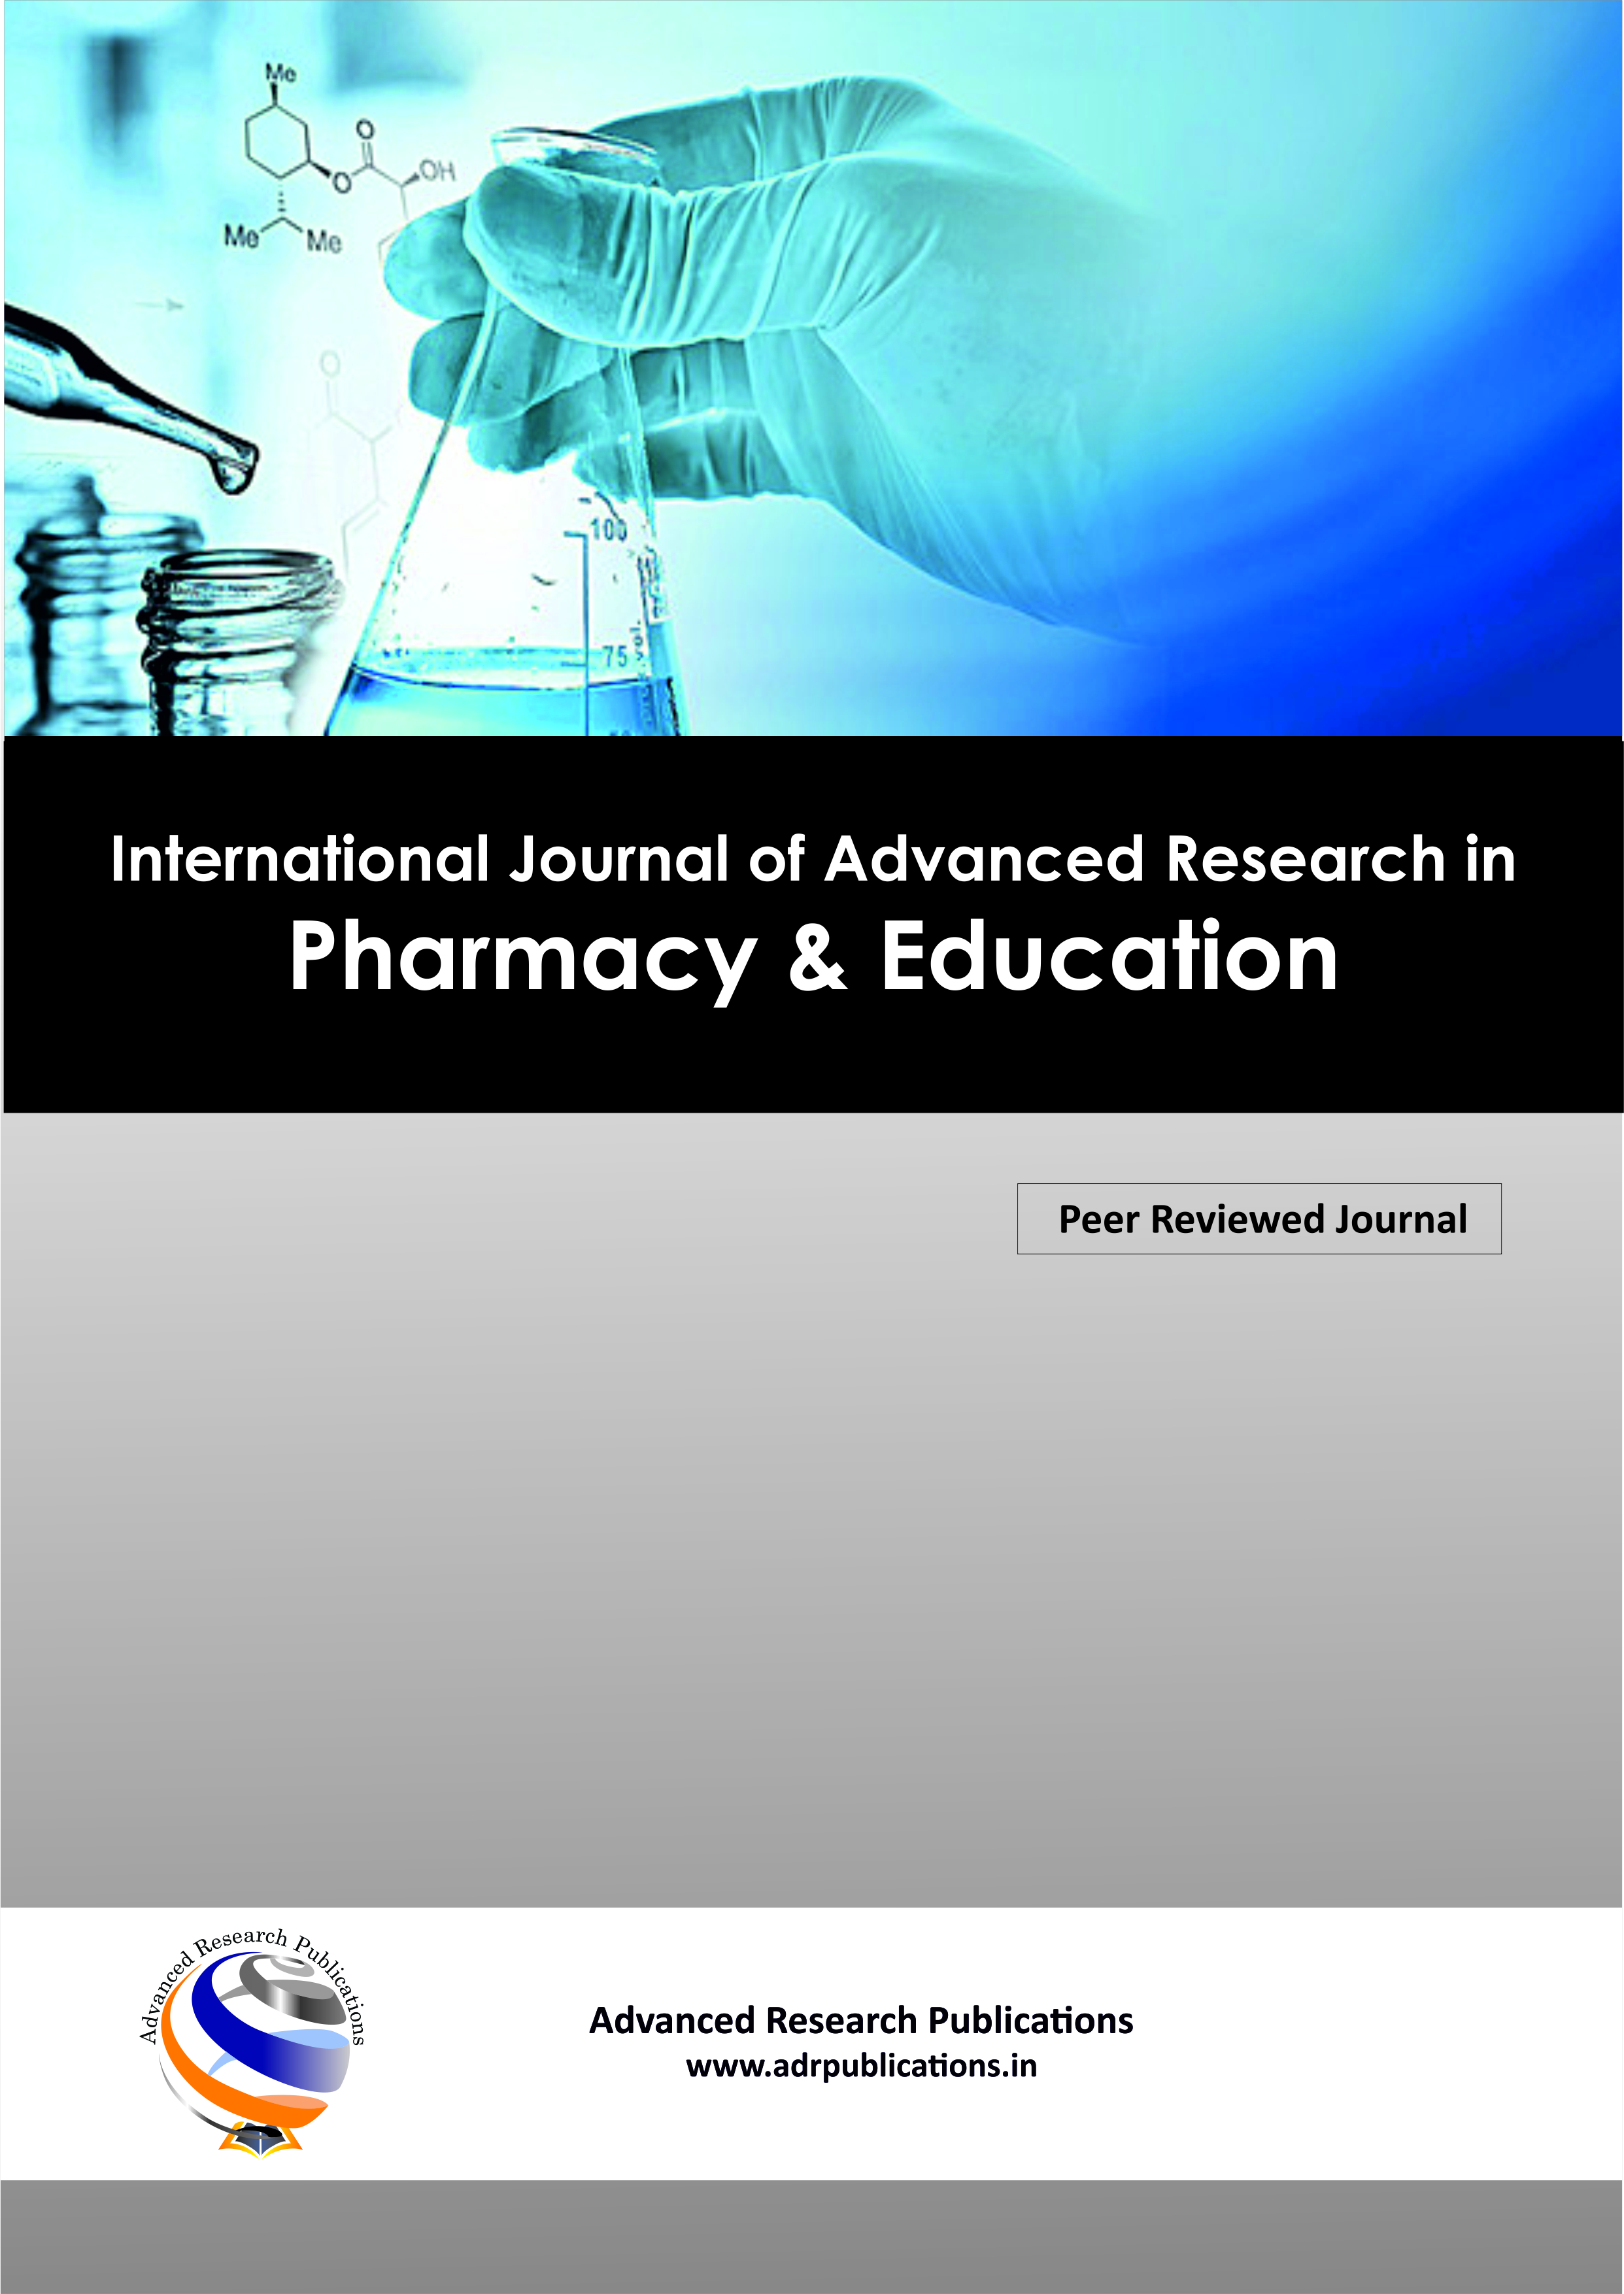 International Journal of Advanced Research in Pharmacy & Education